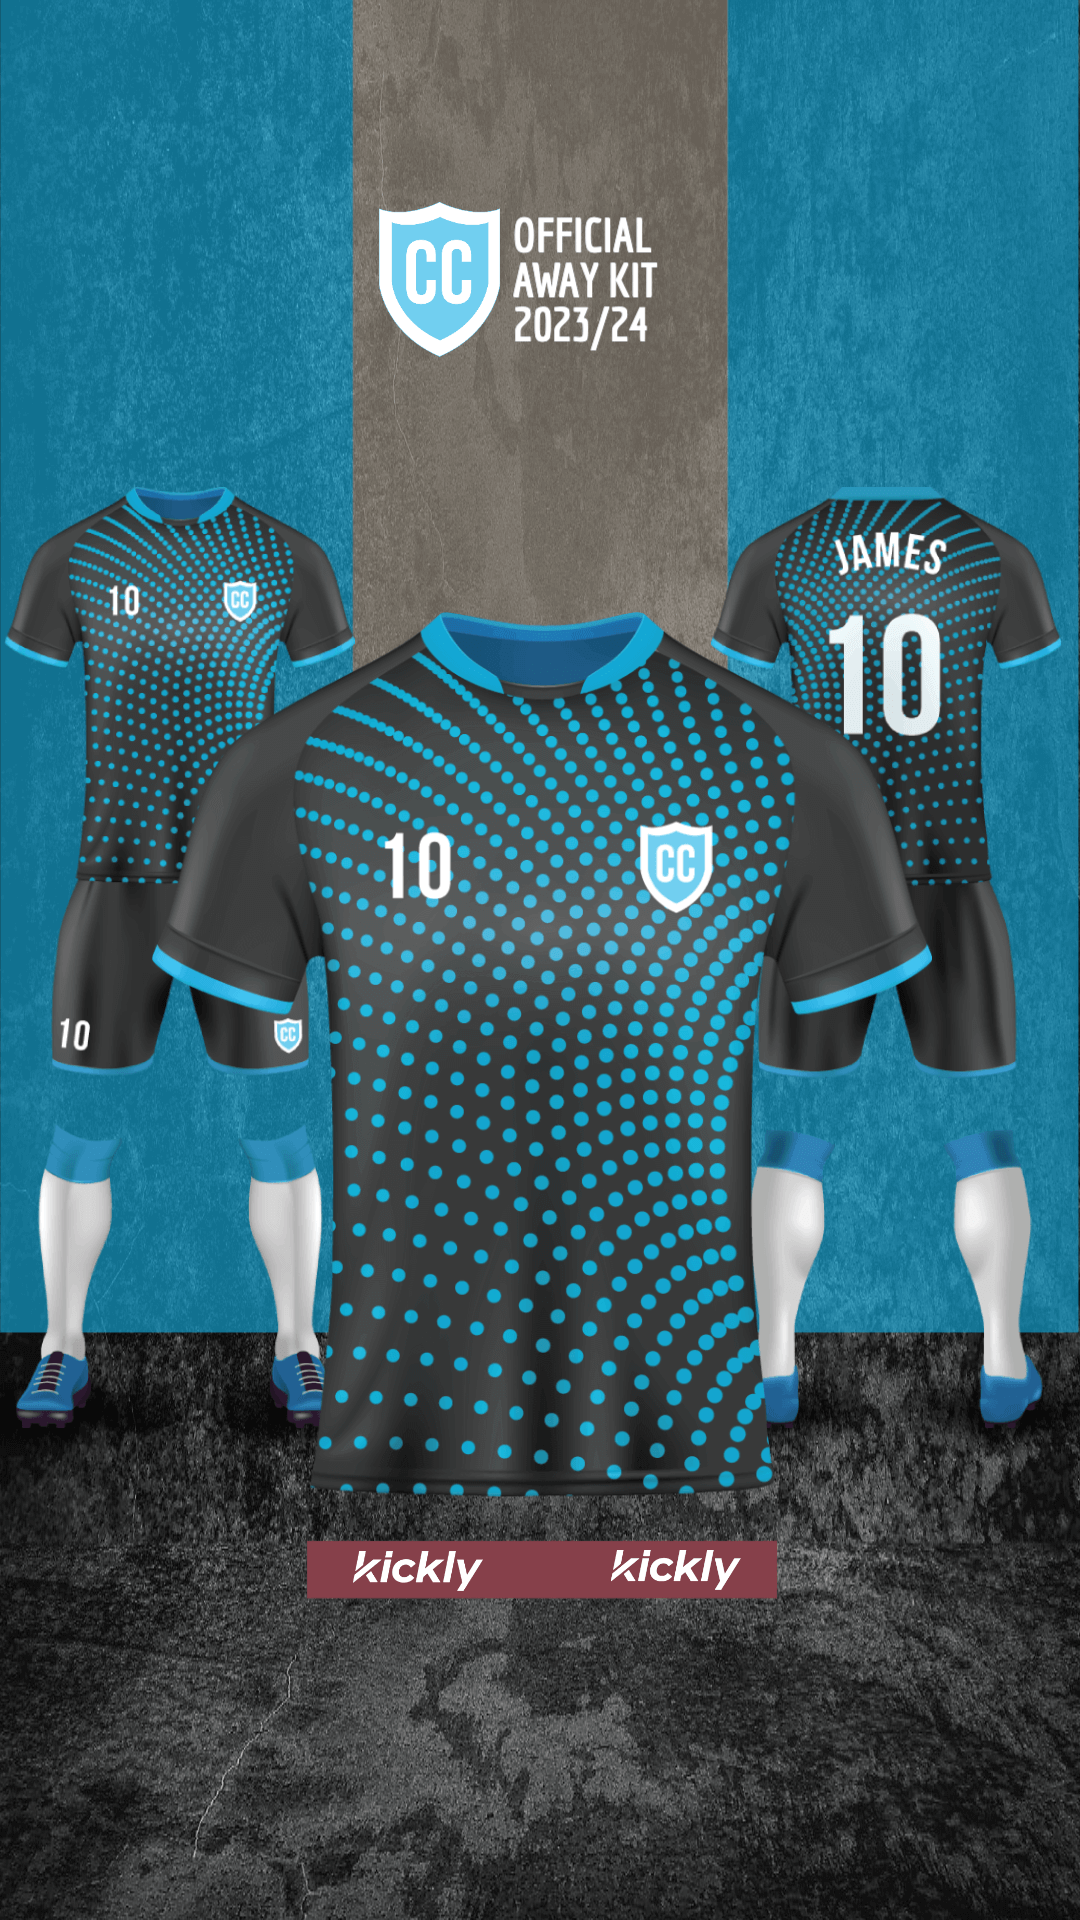 New Official Away Kit Template Design